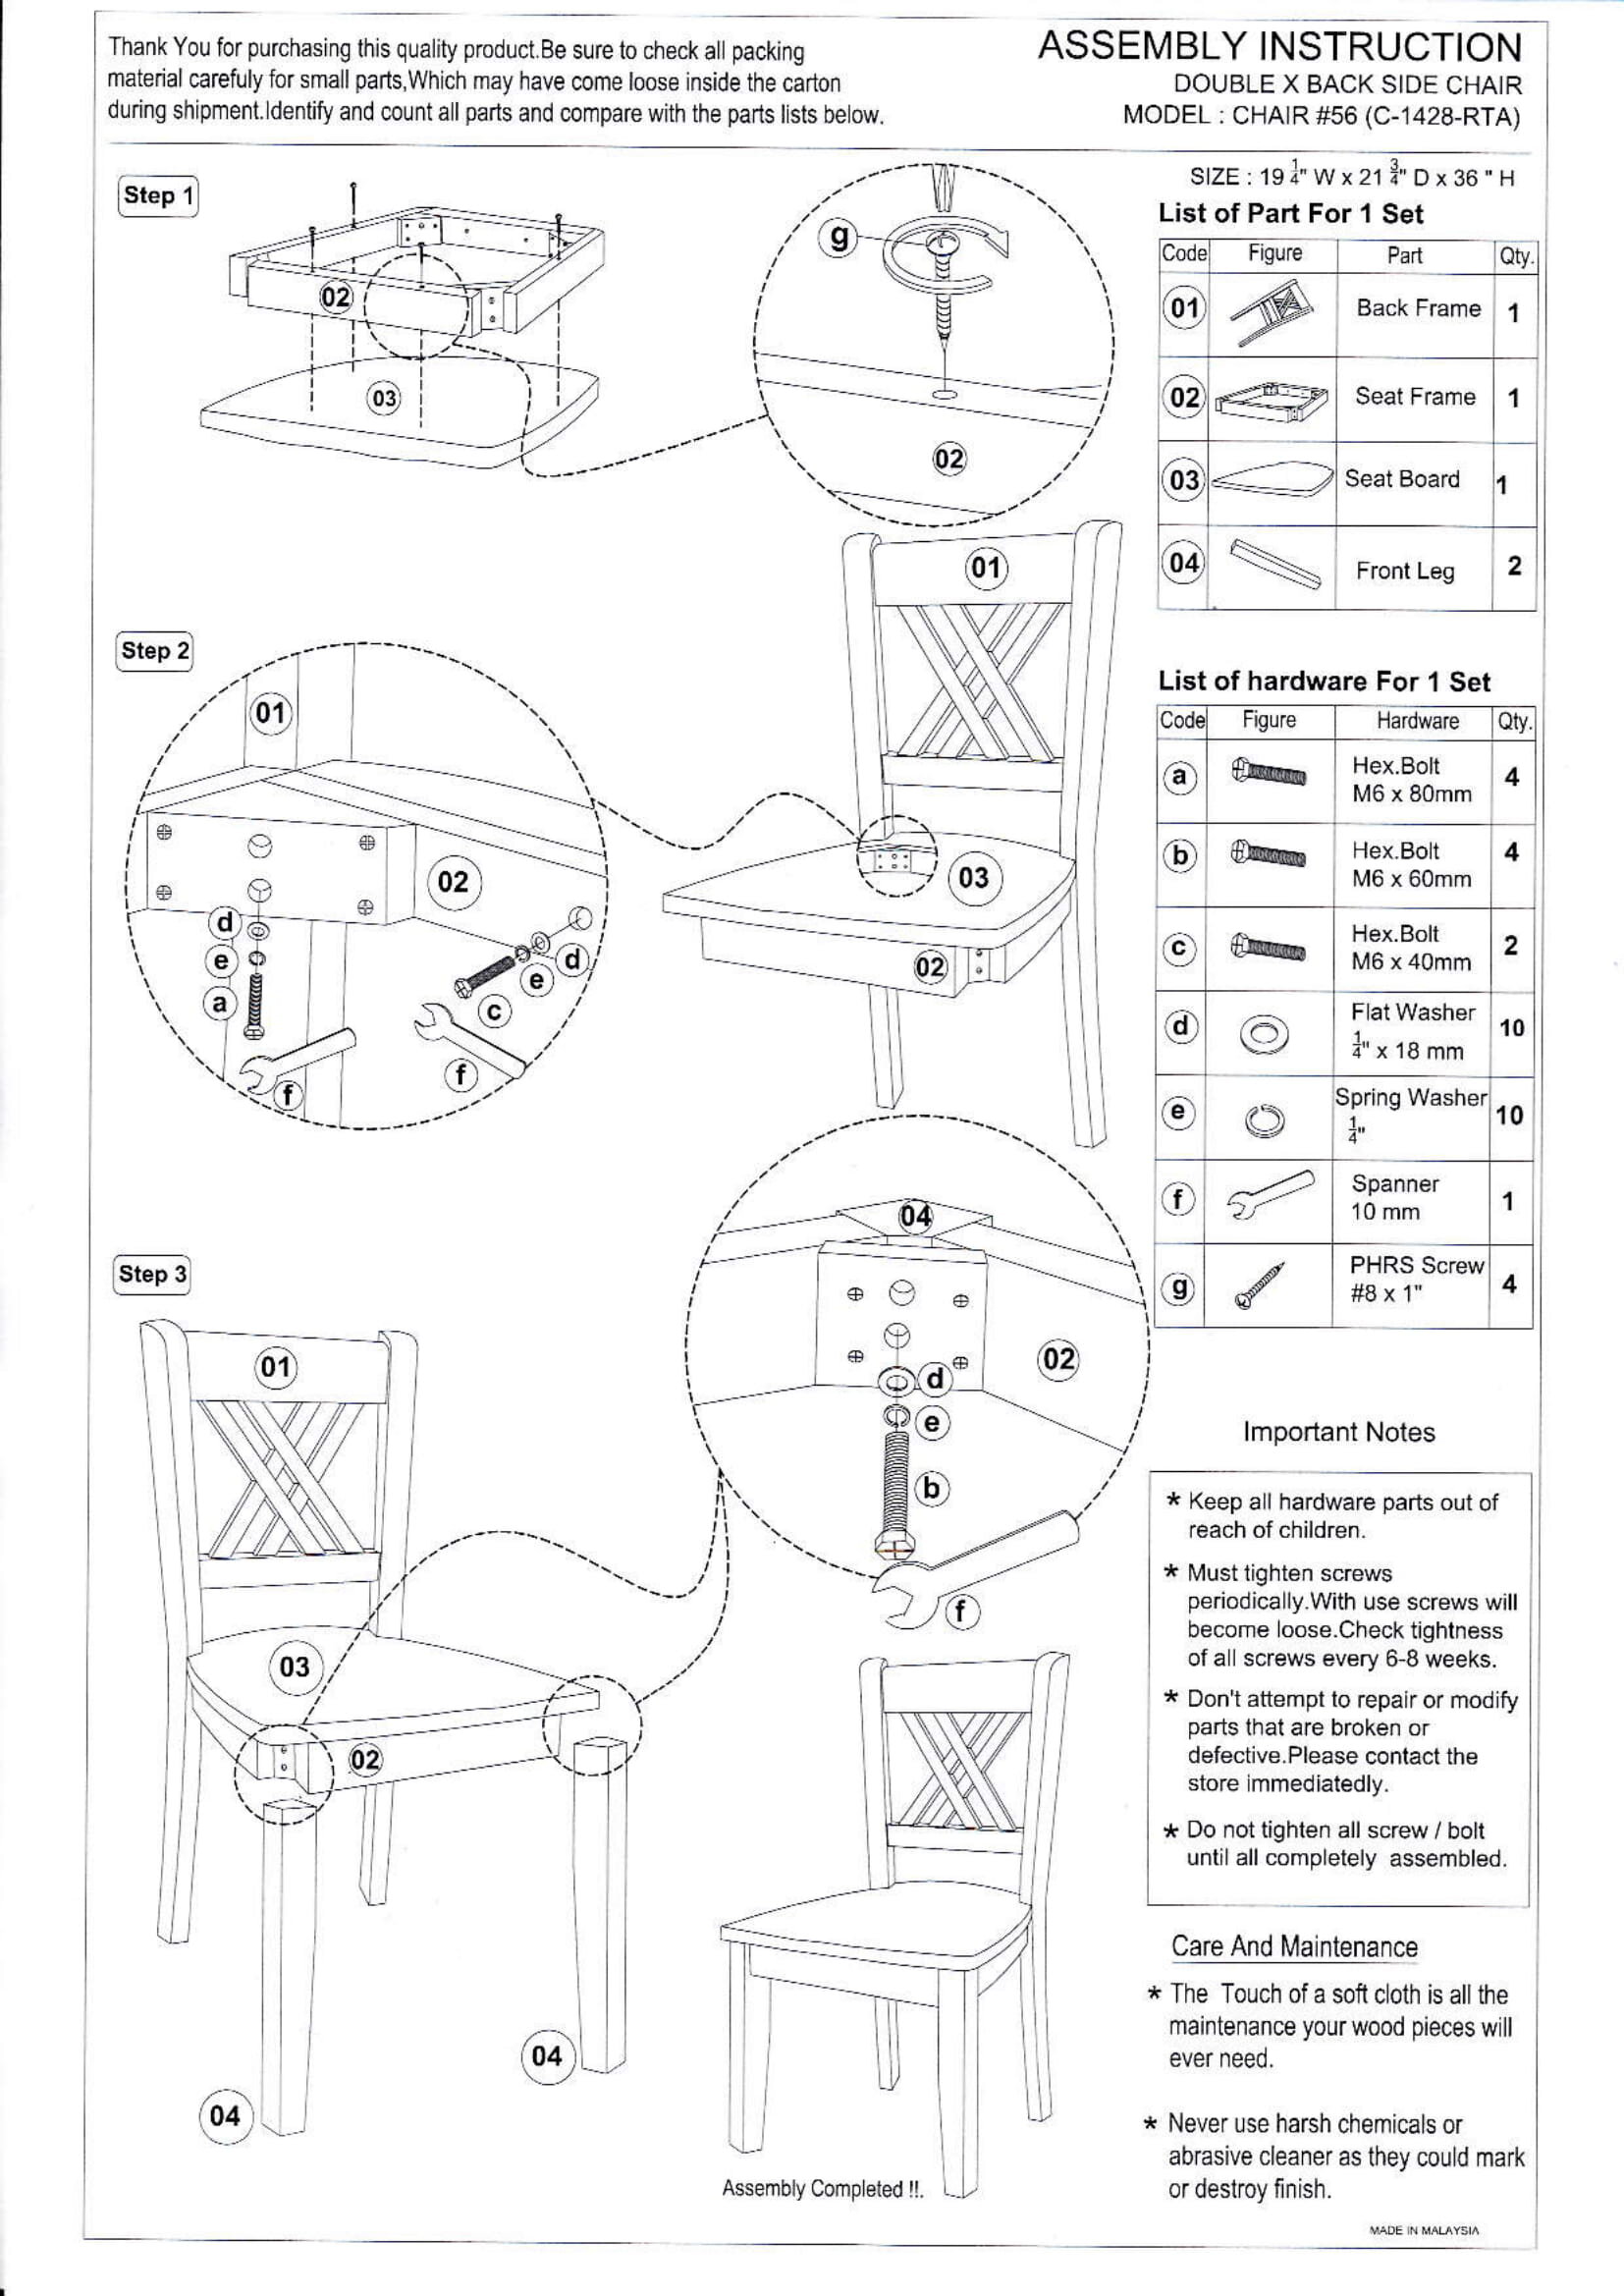 AI Chair # 56 Assembly Instruction-1.jpg